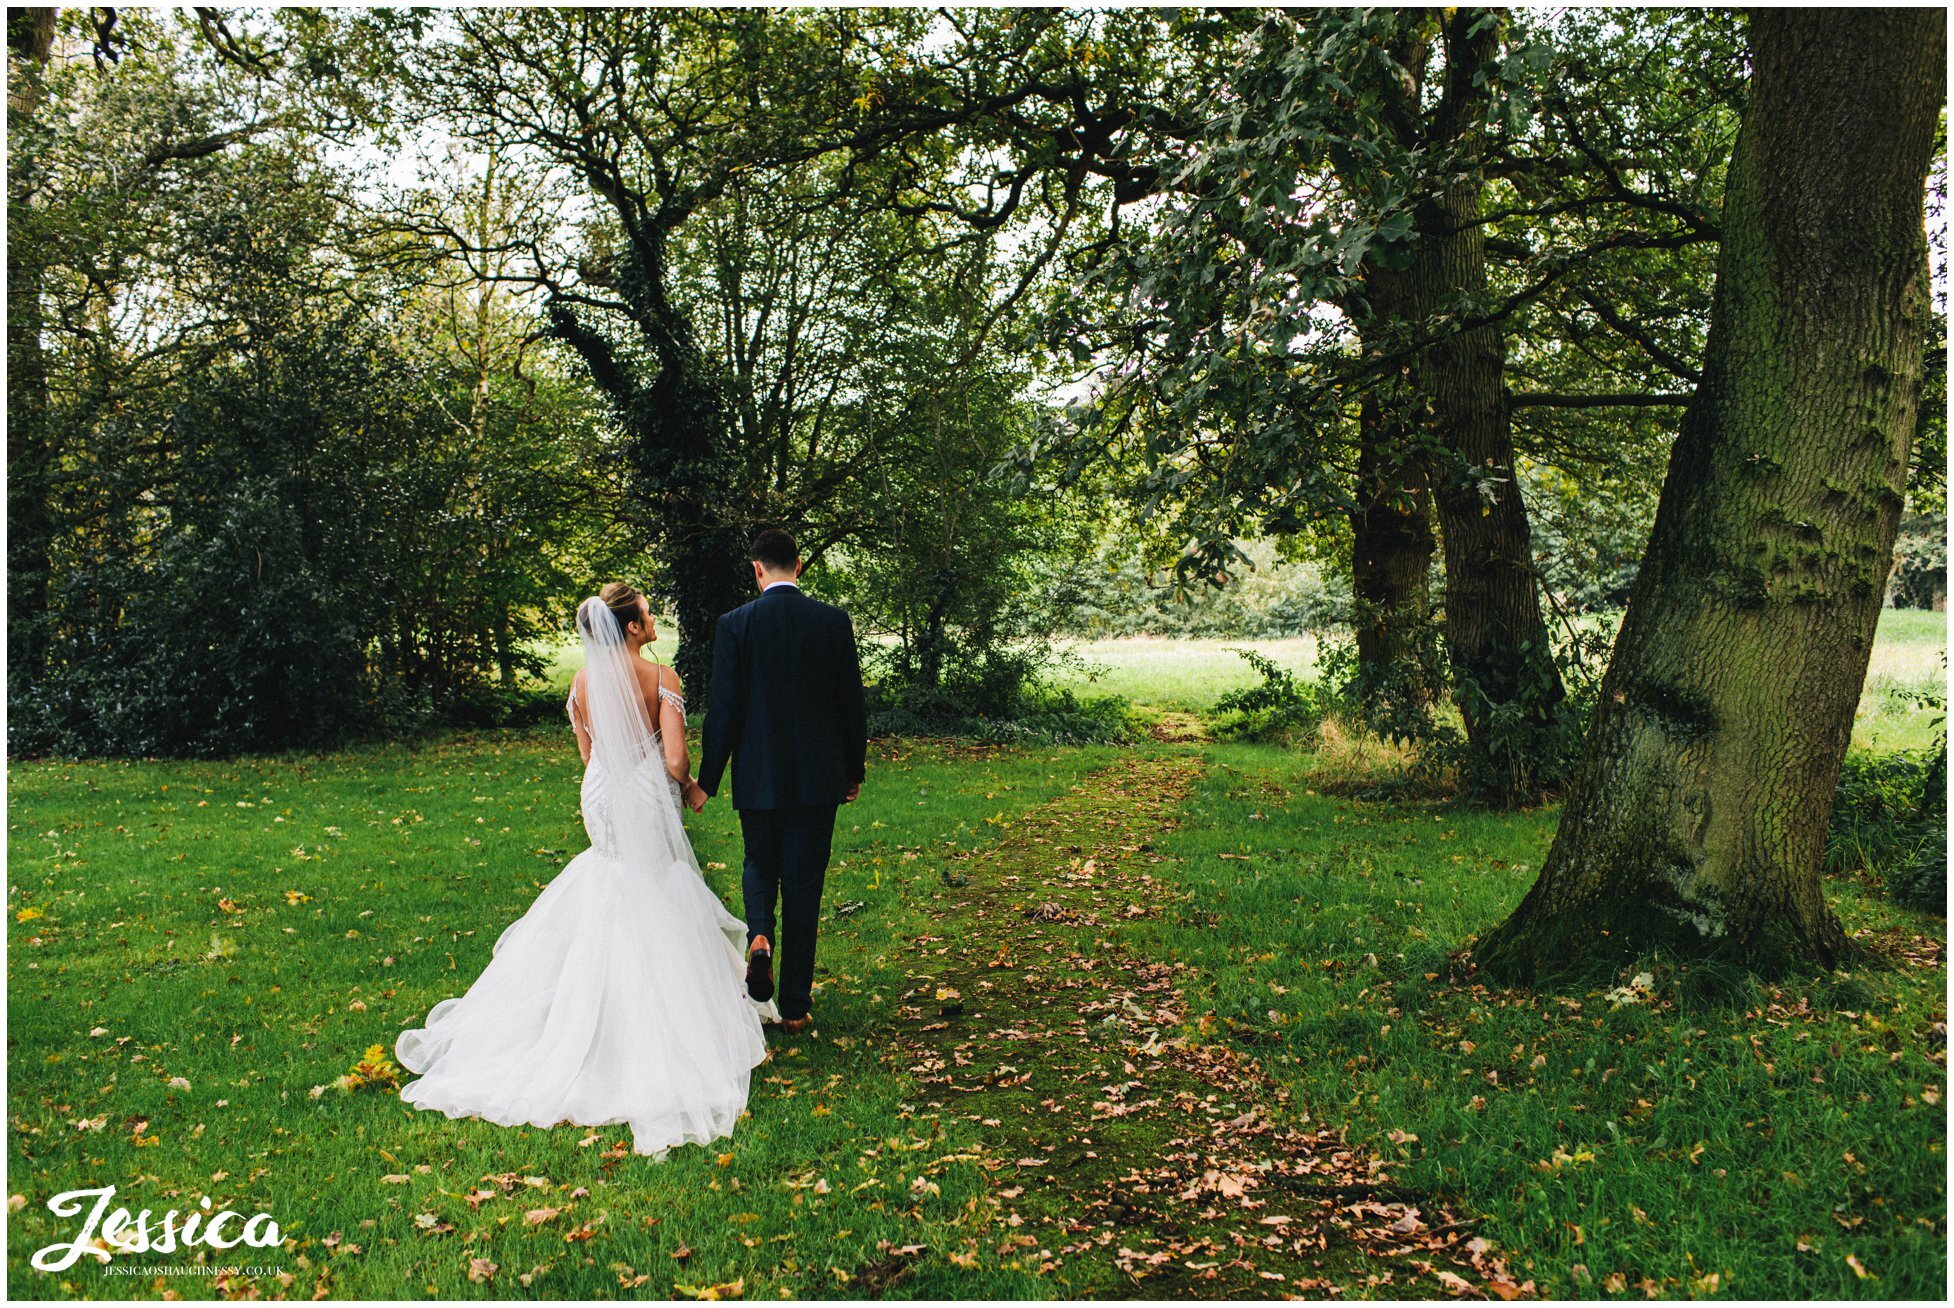 newly wed's walk through the trees in the grounds of their cheshire wedding venue